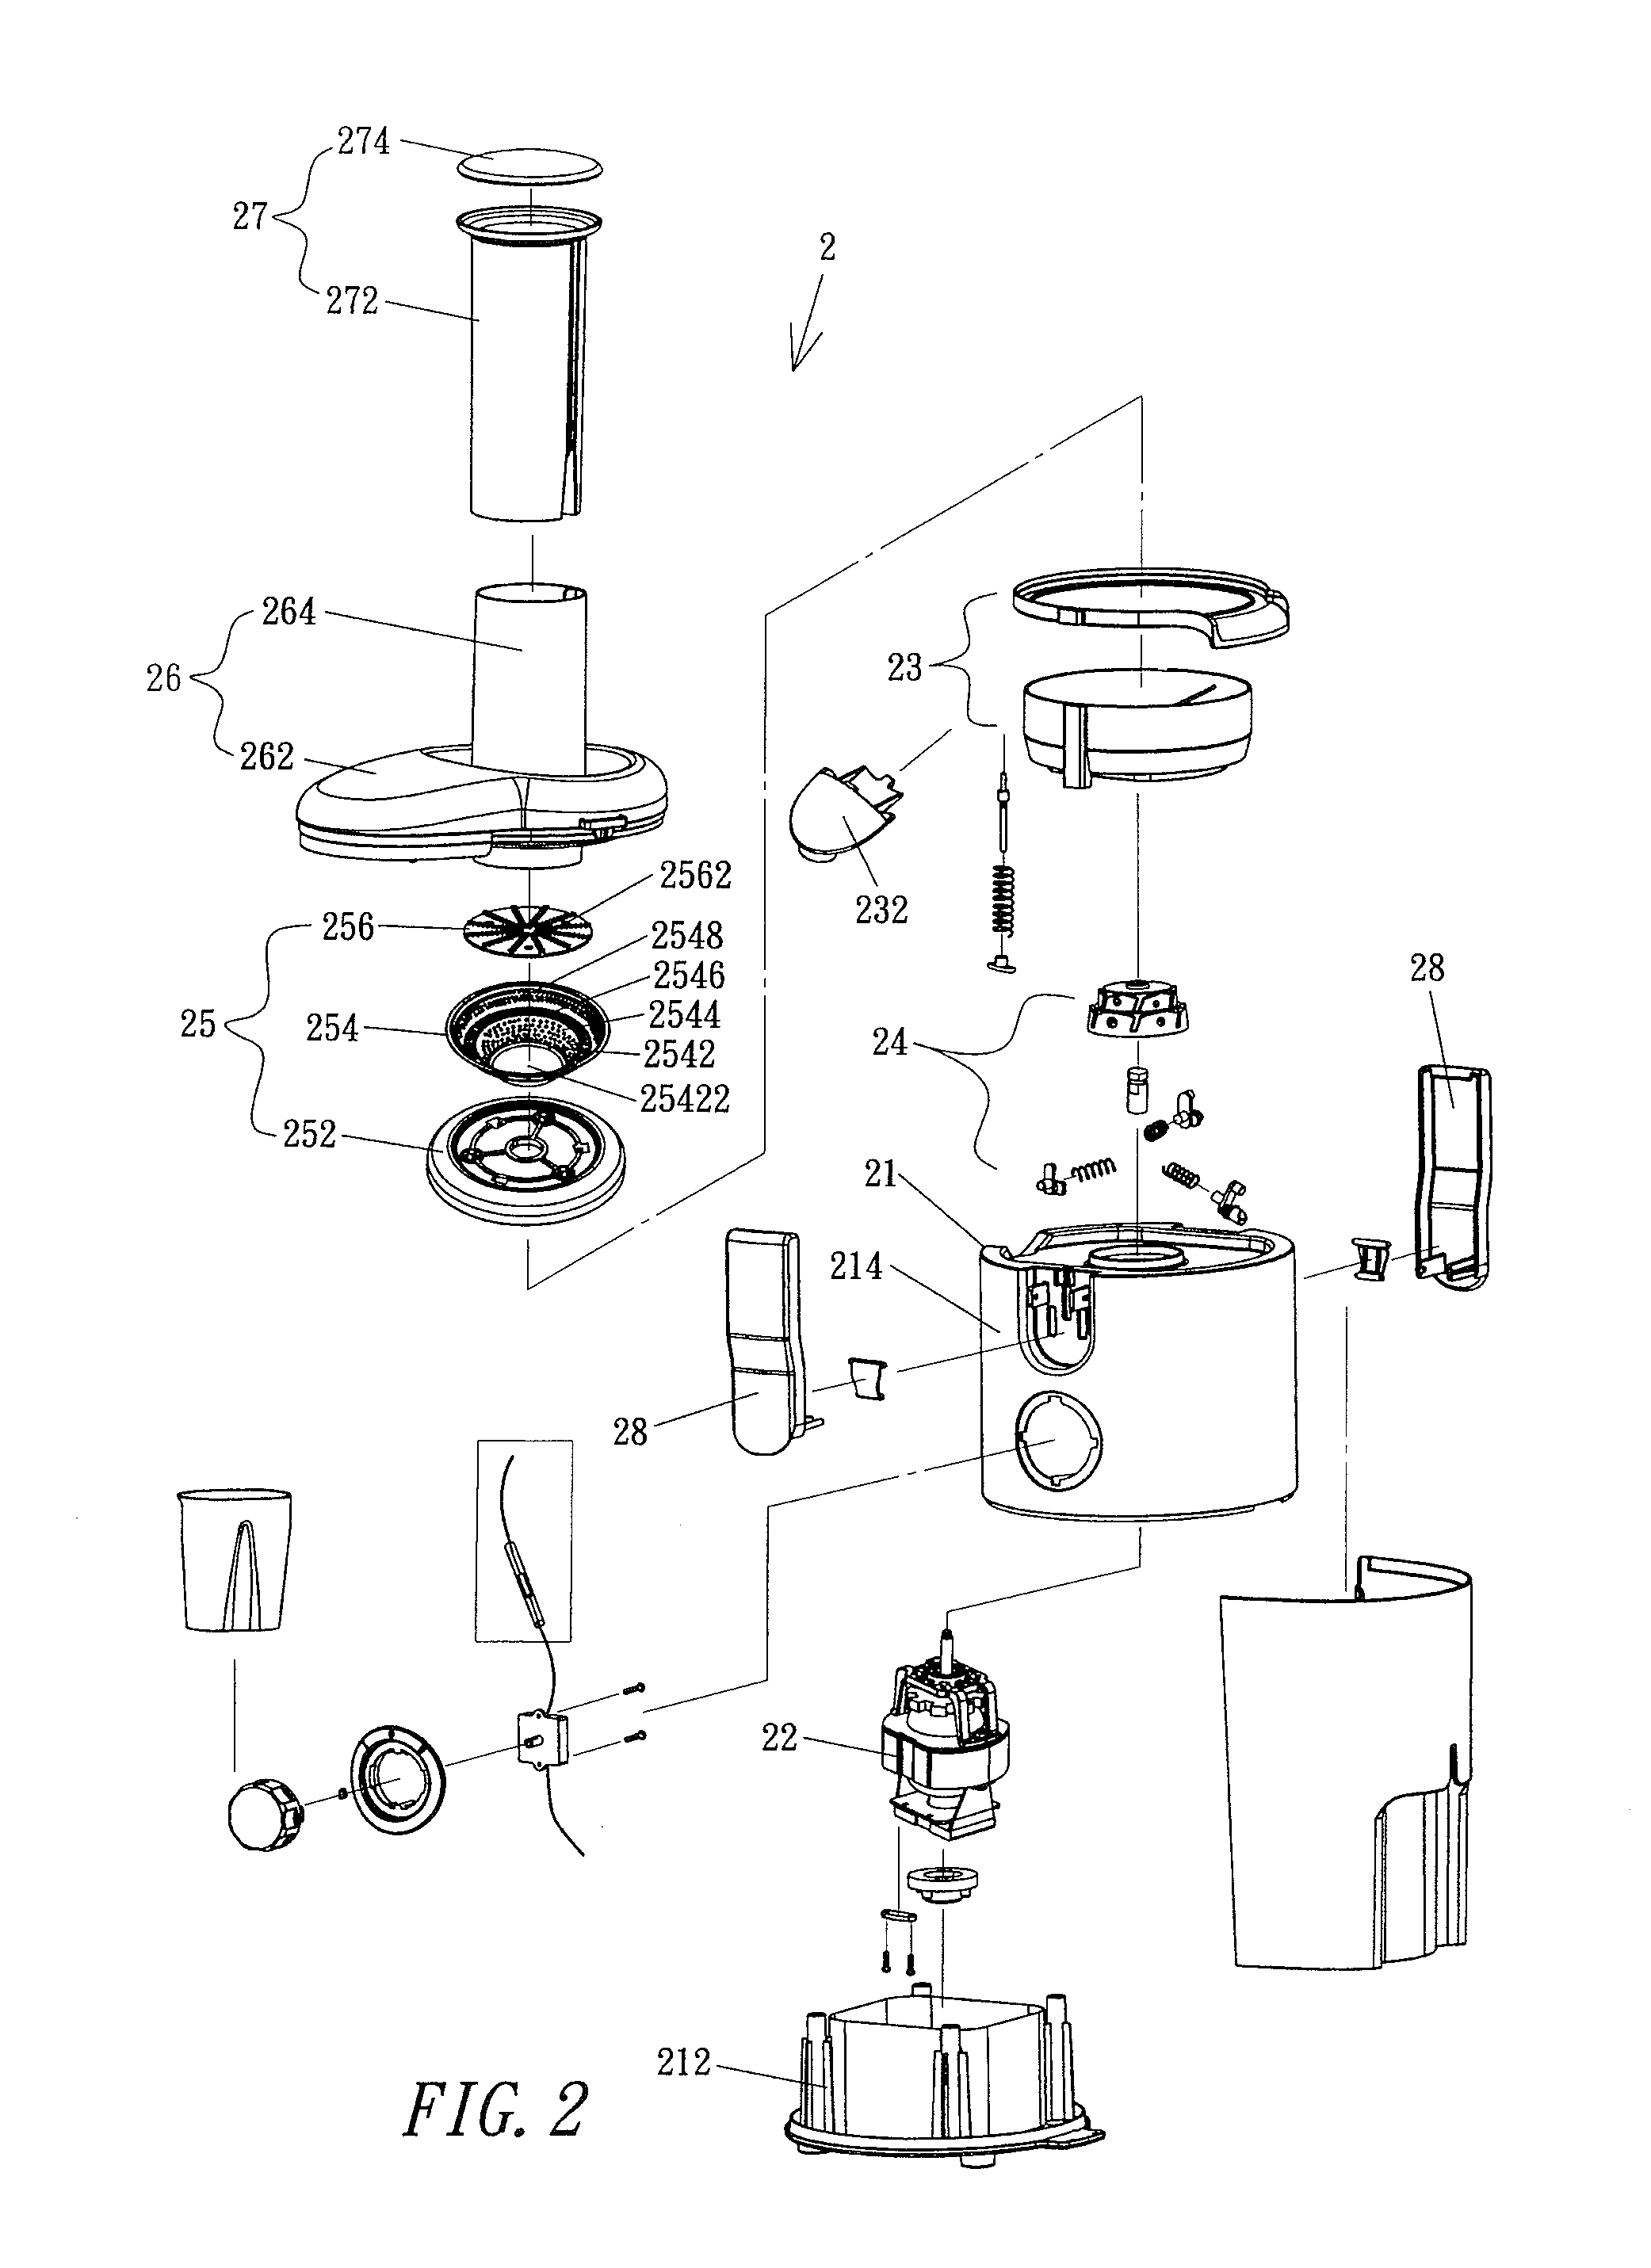 Juice Machine and Filter Thereof